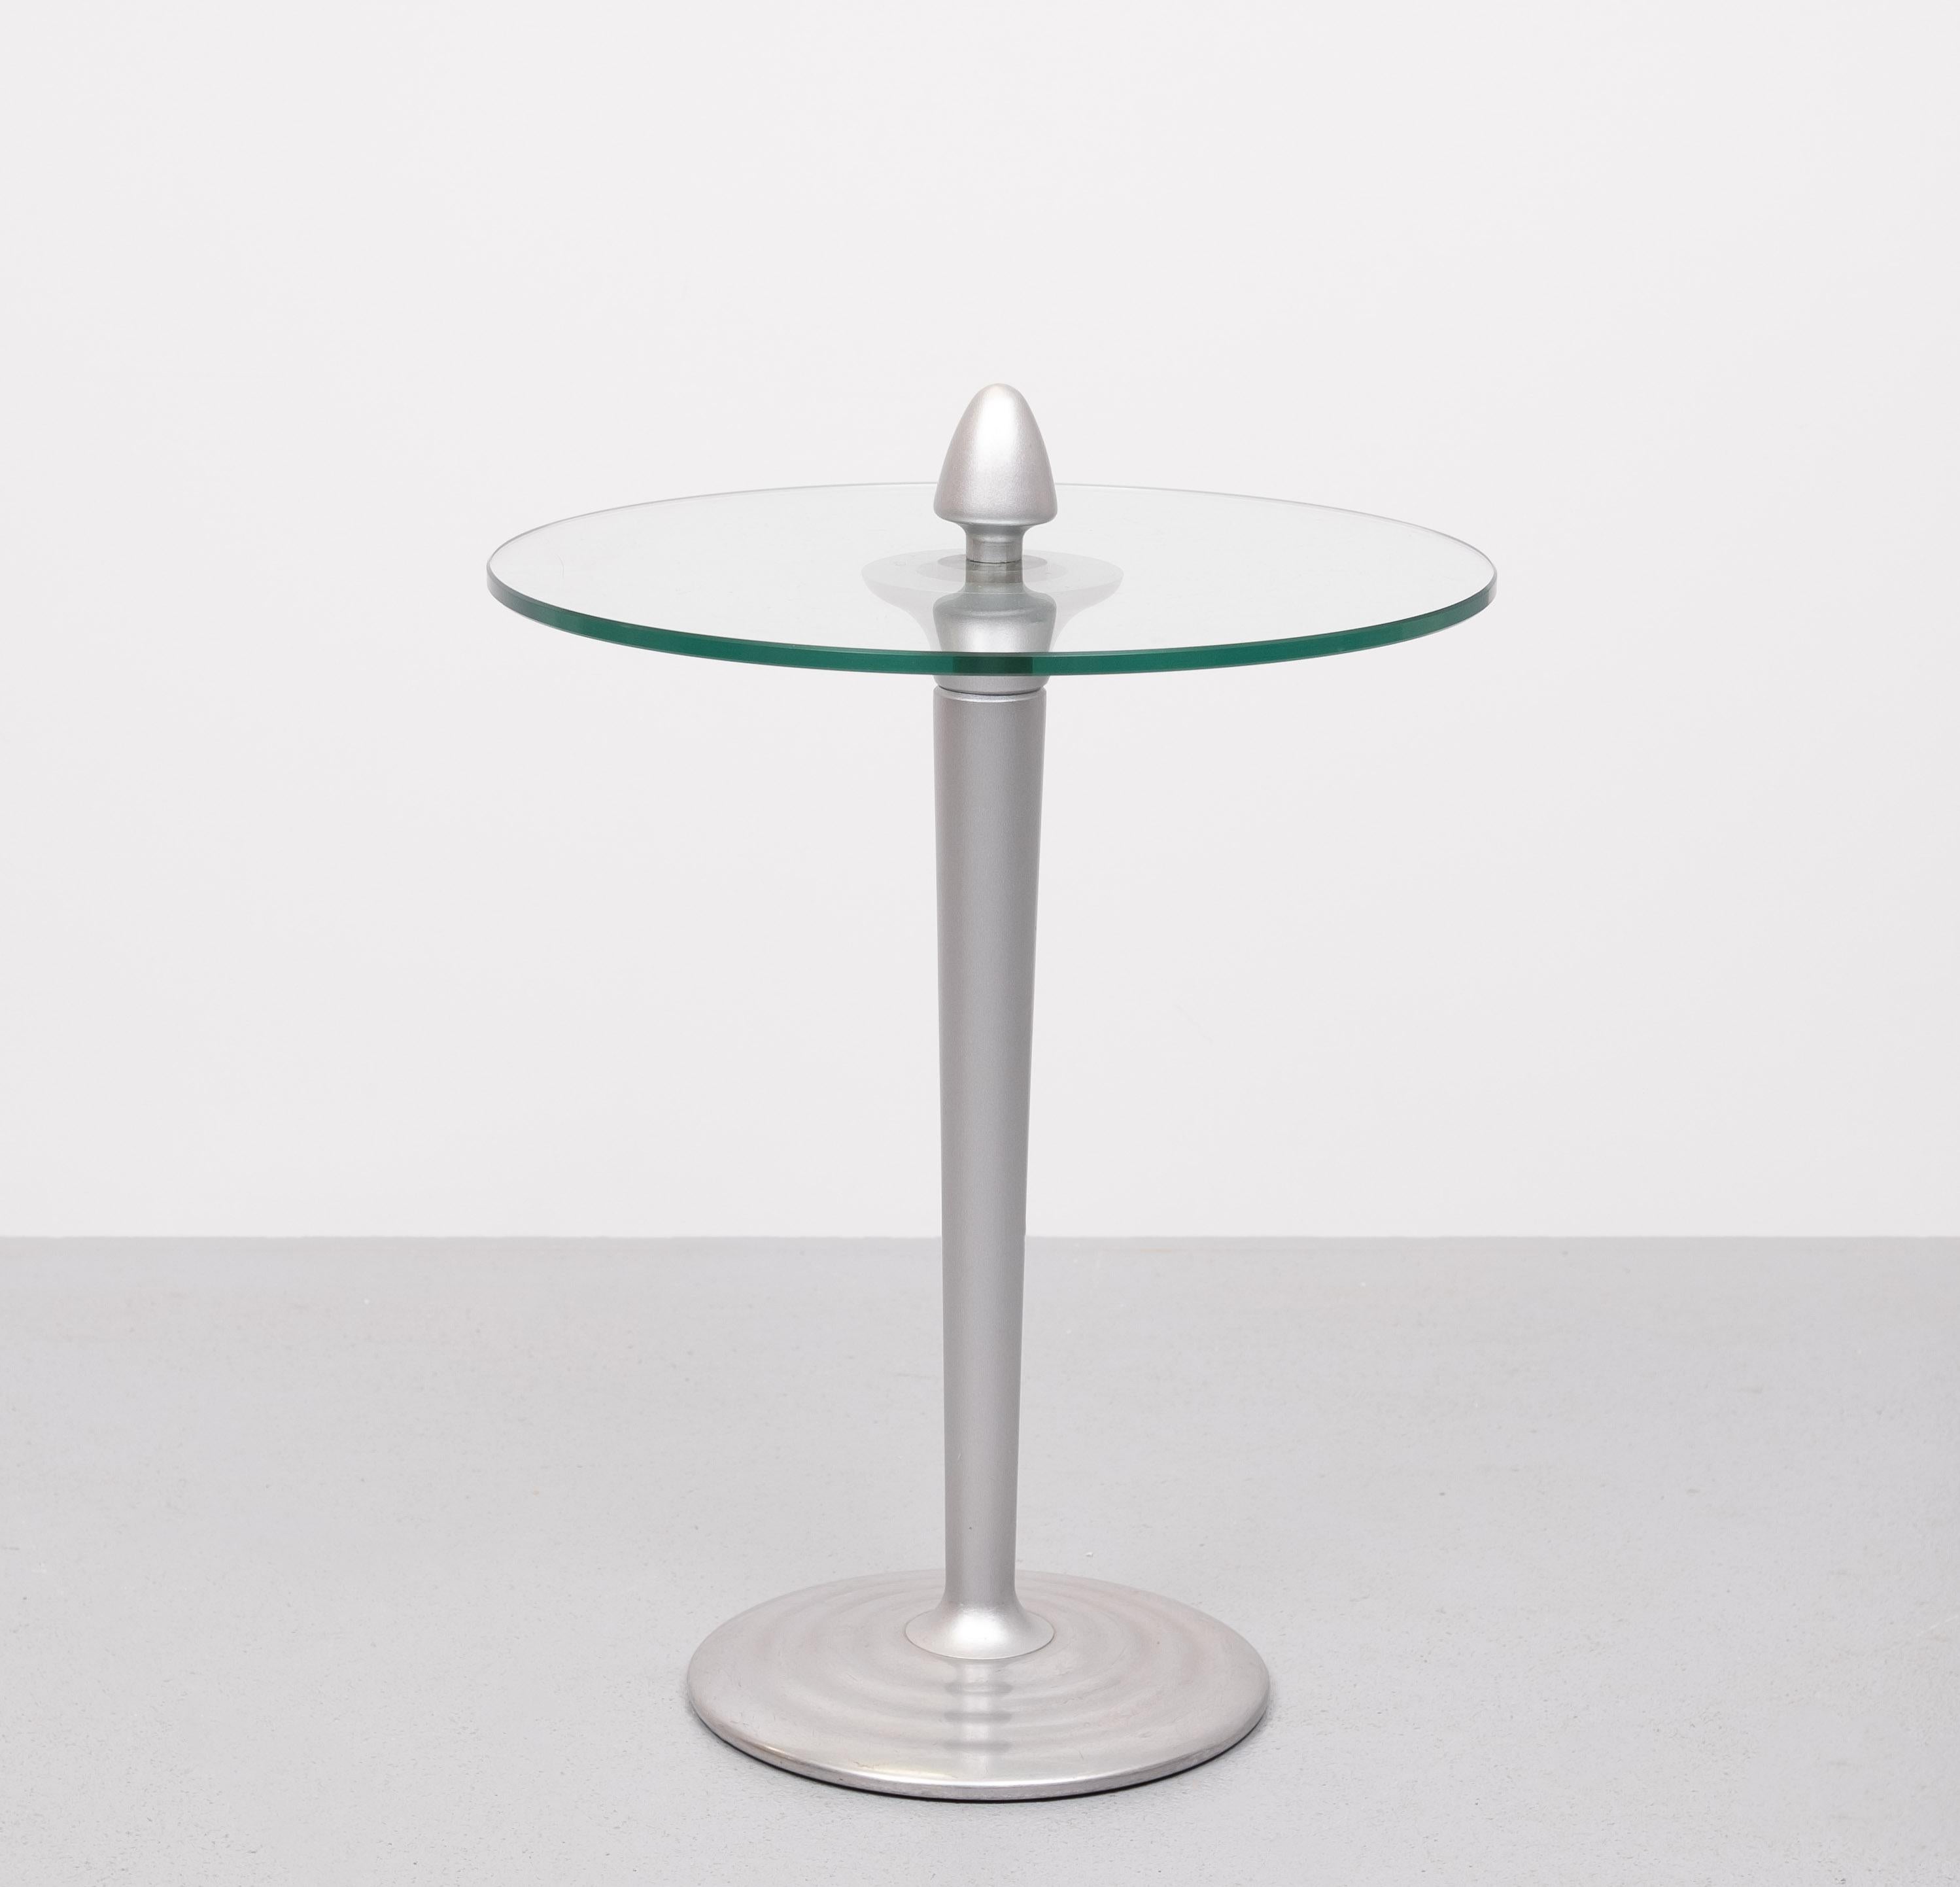 Very nice Side table . Round Glass top .Cast Aluminum base .
The knob on top is for easy carrying the table . Good quality table . 